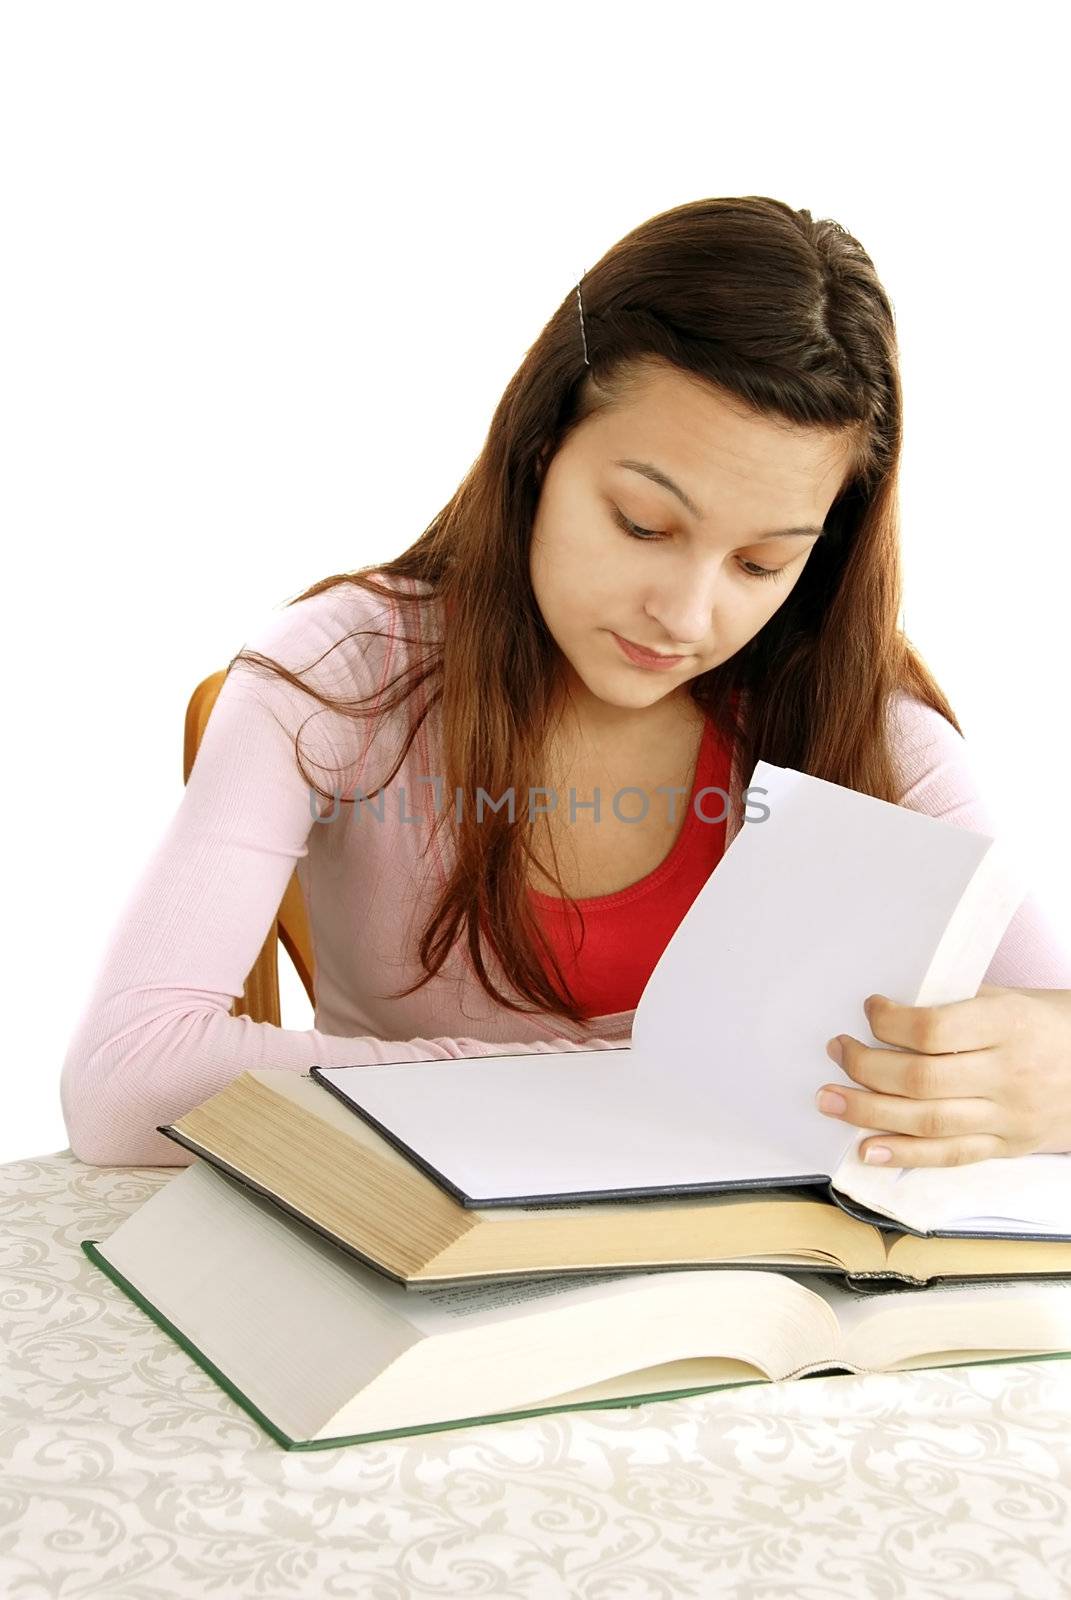 Teenage girl reading by simply